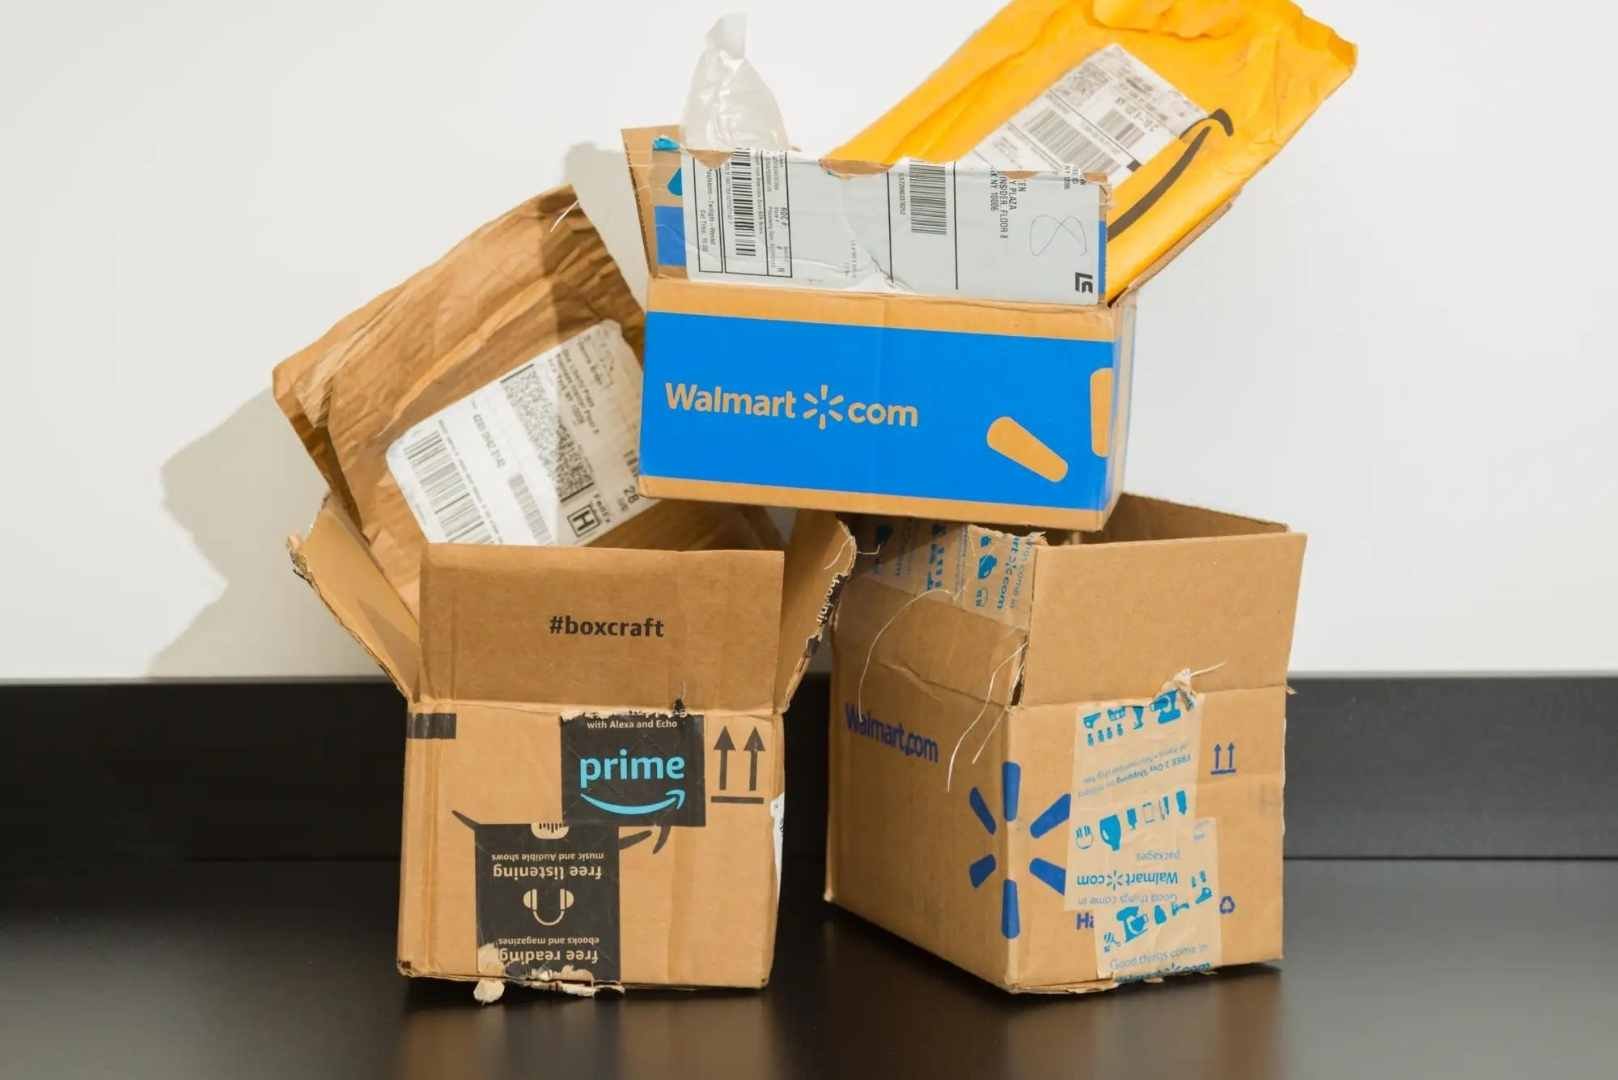 Walmart and Amazon Prime packages